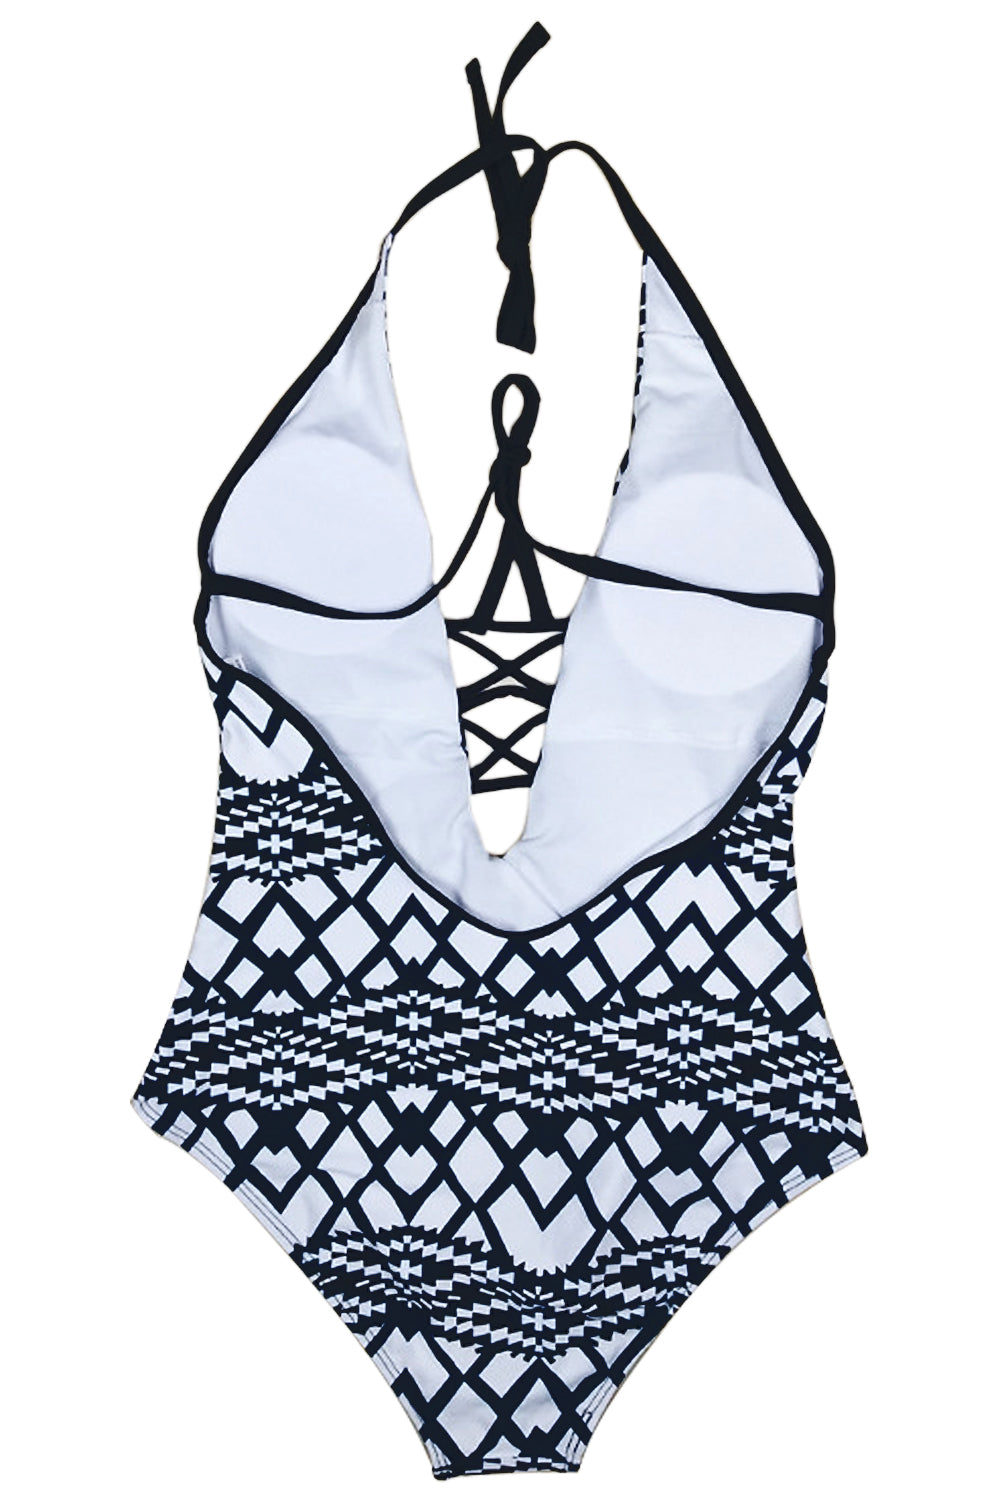 Iyasson Diamond printing With Strappy Detailing One-piece Swimsuit